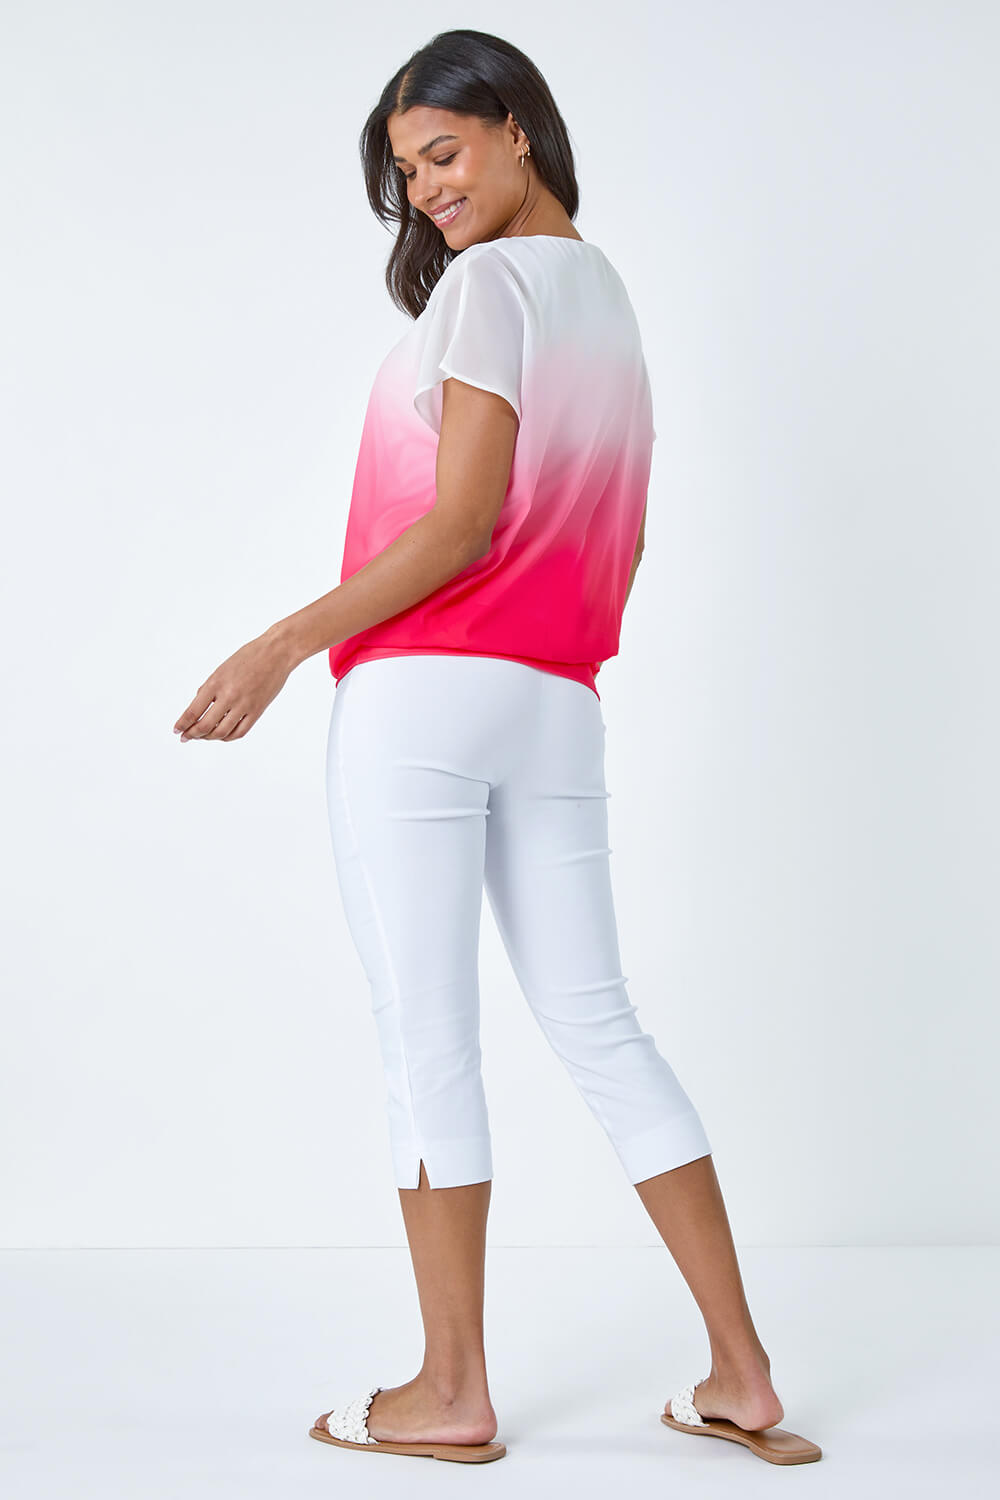 CORAL Ombre Chiffon Overlay Blouson Top, Image 3 of 5